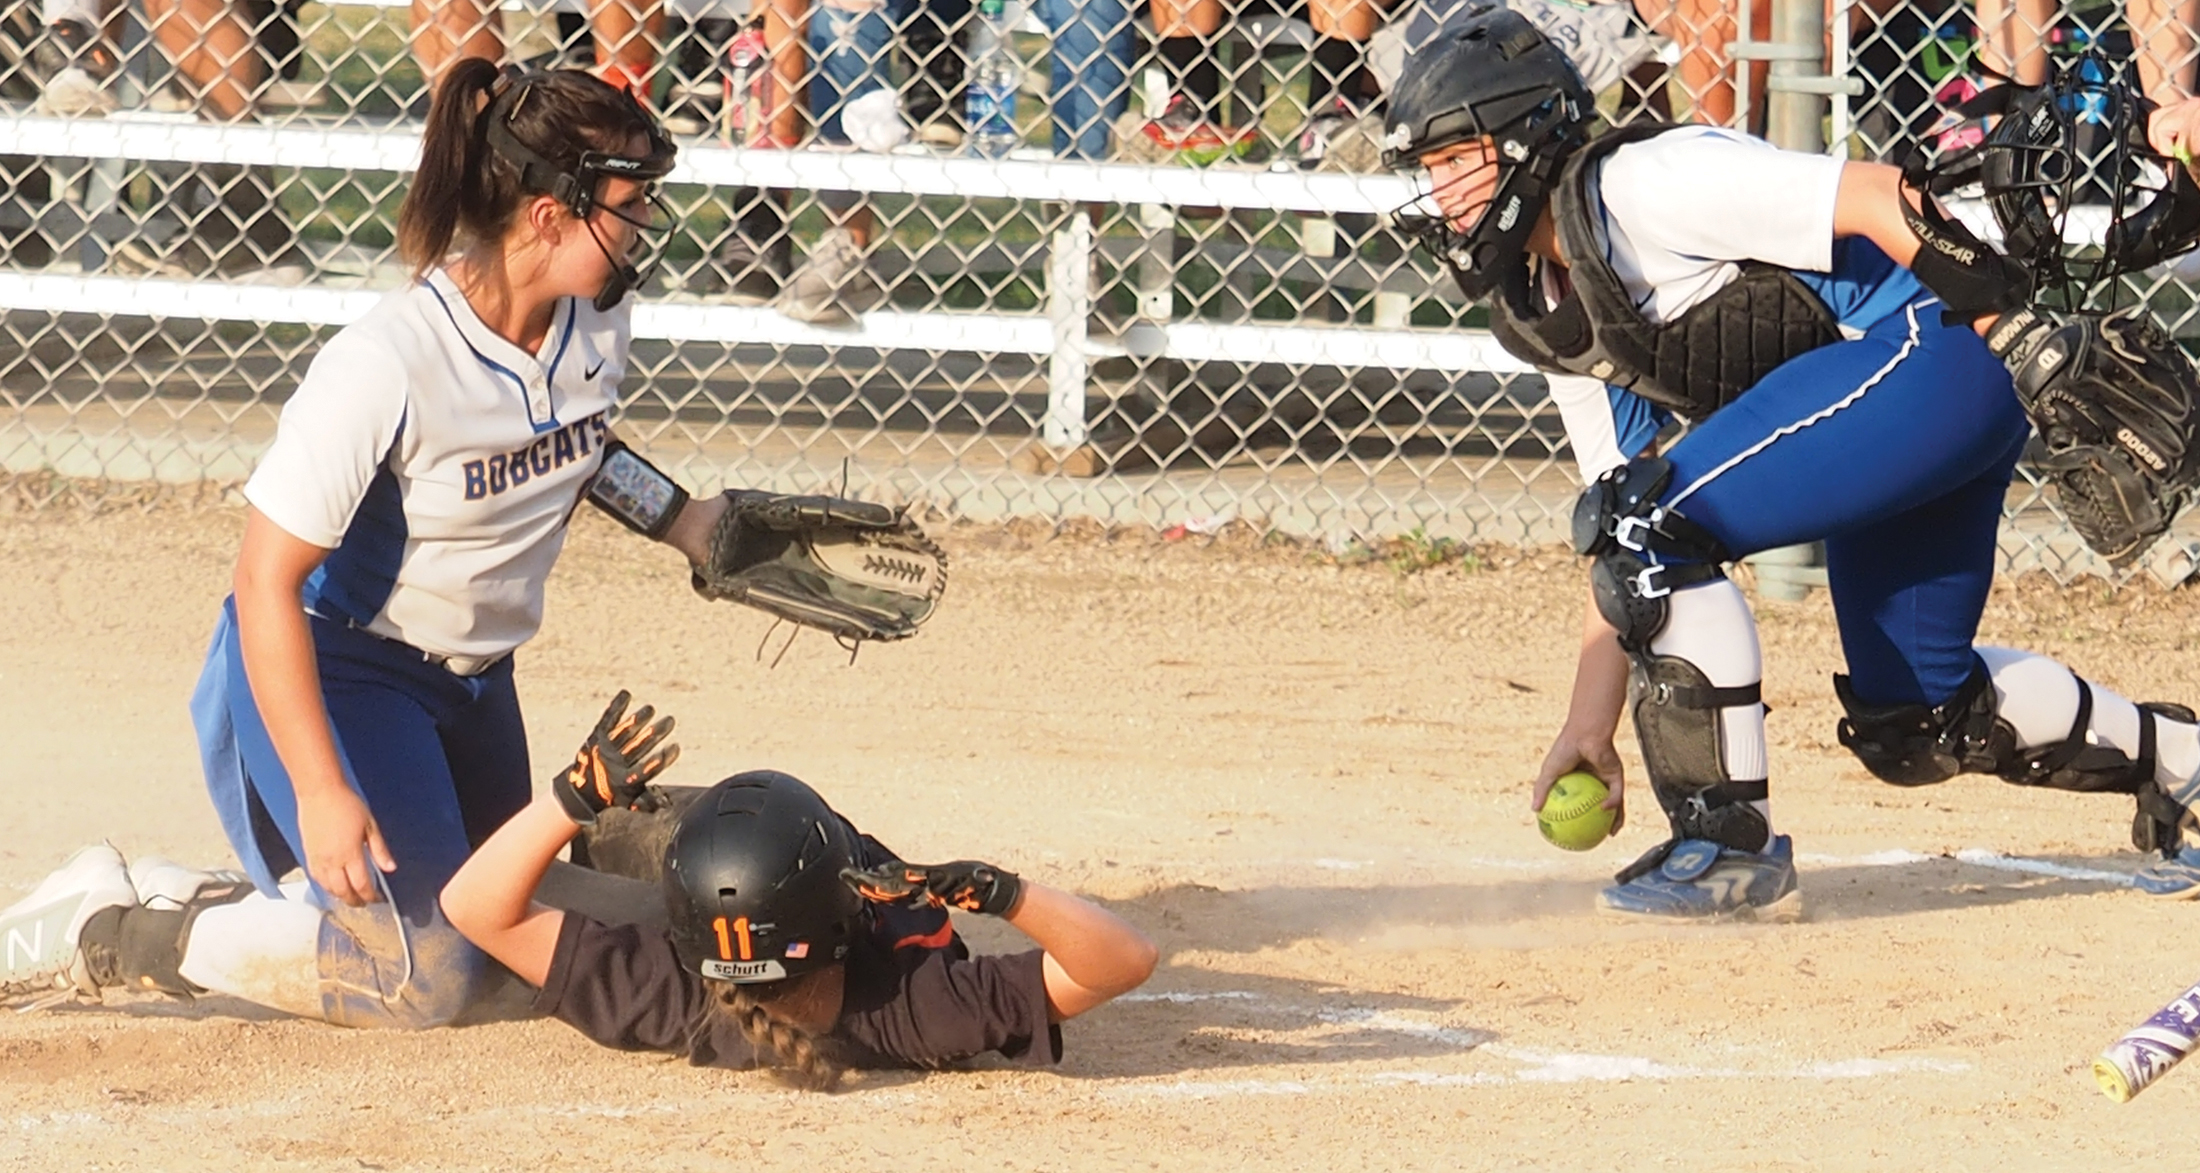 No. 7 seed Comets face No. 2 seed Fairfield in Softball State first round